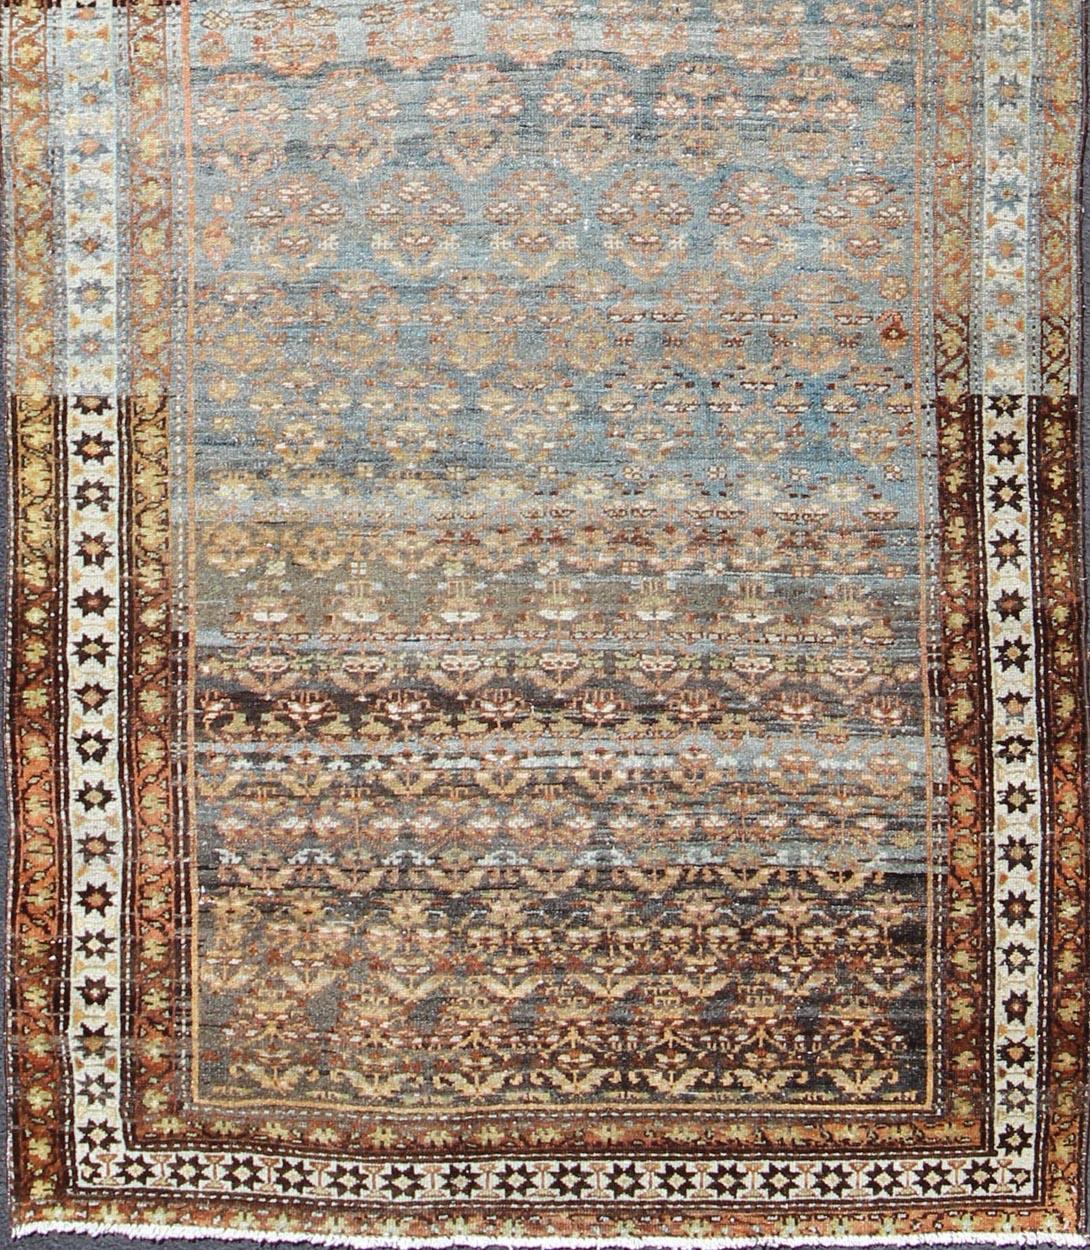  Malayer antique runner from Persia with Ornate Paisley design, Keivan Woven Arts/ rug ZIR-16, country of origin / type: Iran / Malayer, circa 1900

This antique Persian Malayer runner, circa early 20th century, relies heavily on exquisite details